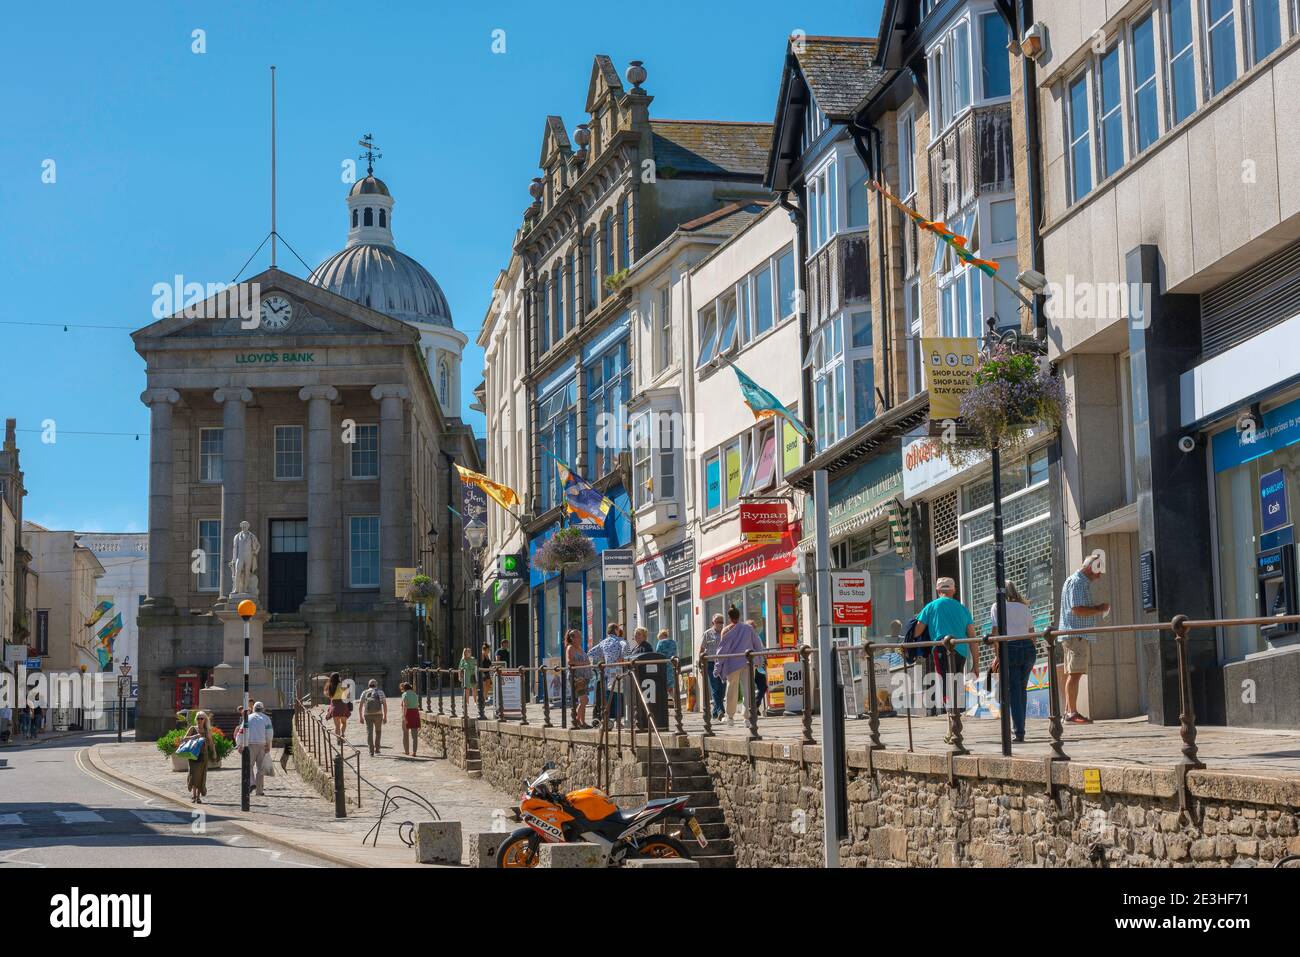 UK high street, view of traditional shops and stores in the High Street in Penzance, England, UK Stock Photo